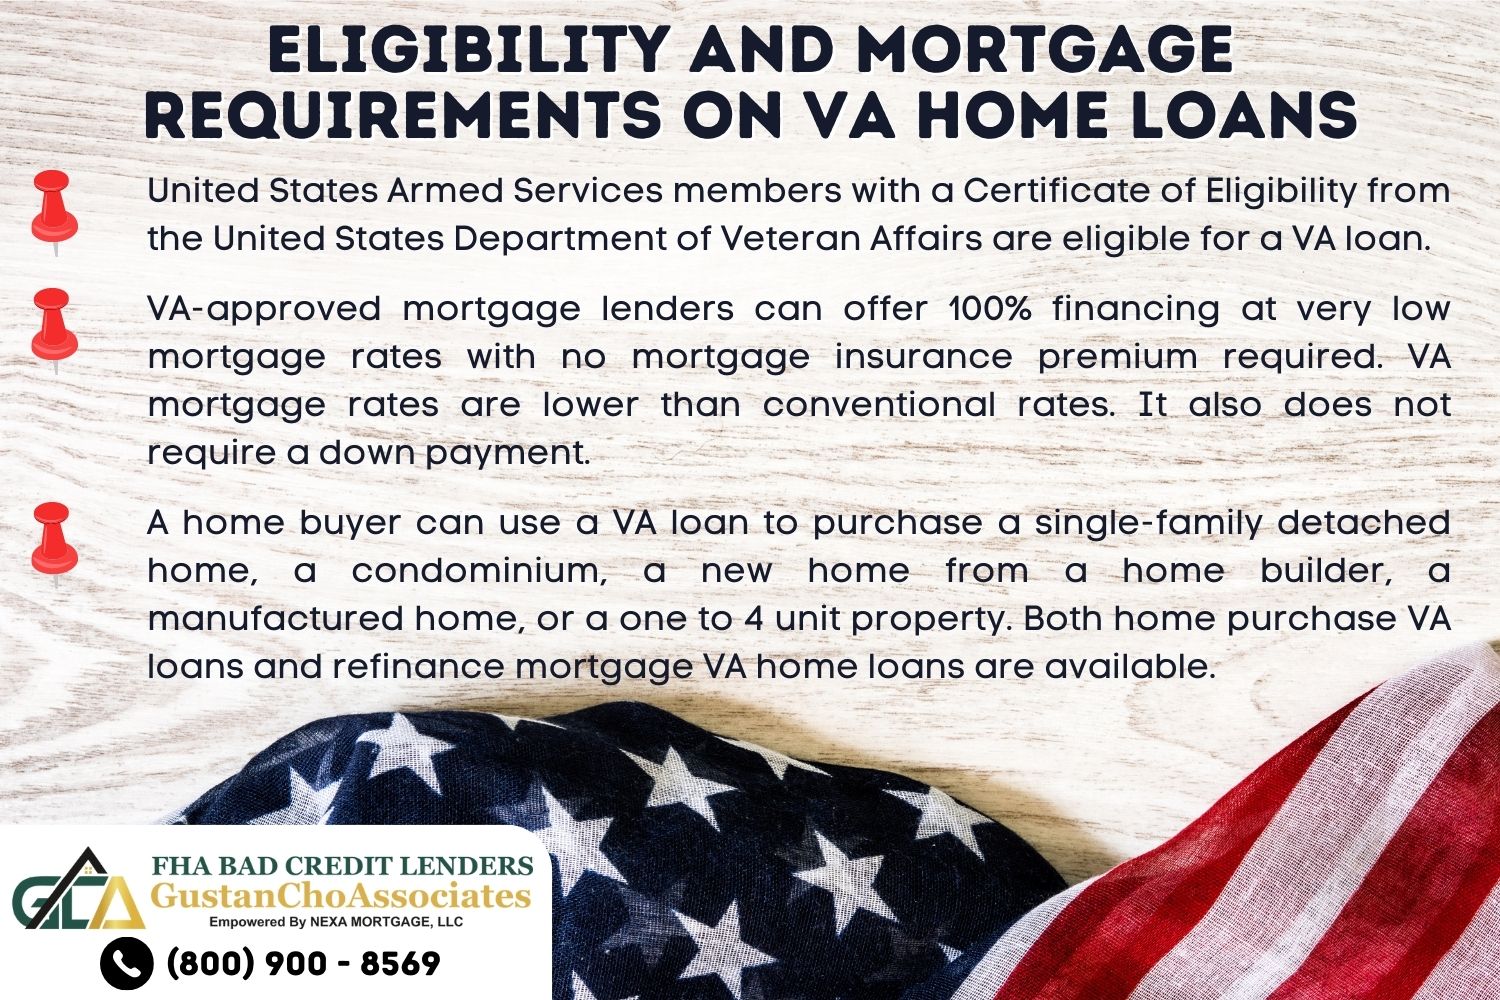 Eligibility and Mortgage Requirements on VA Home Loans